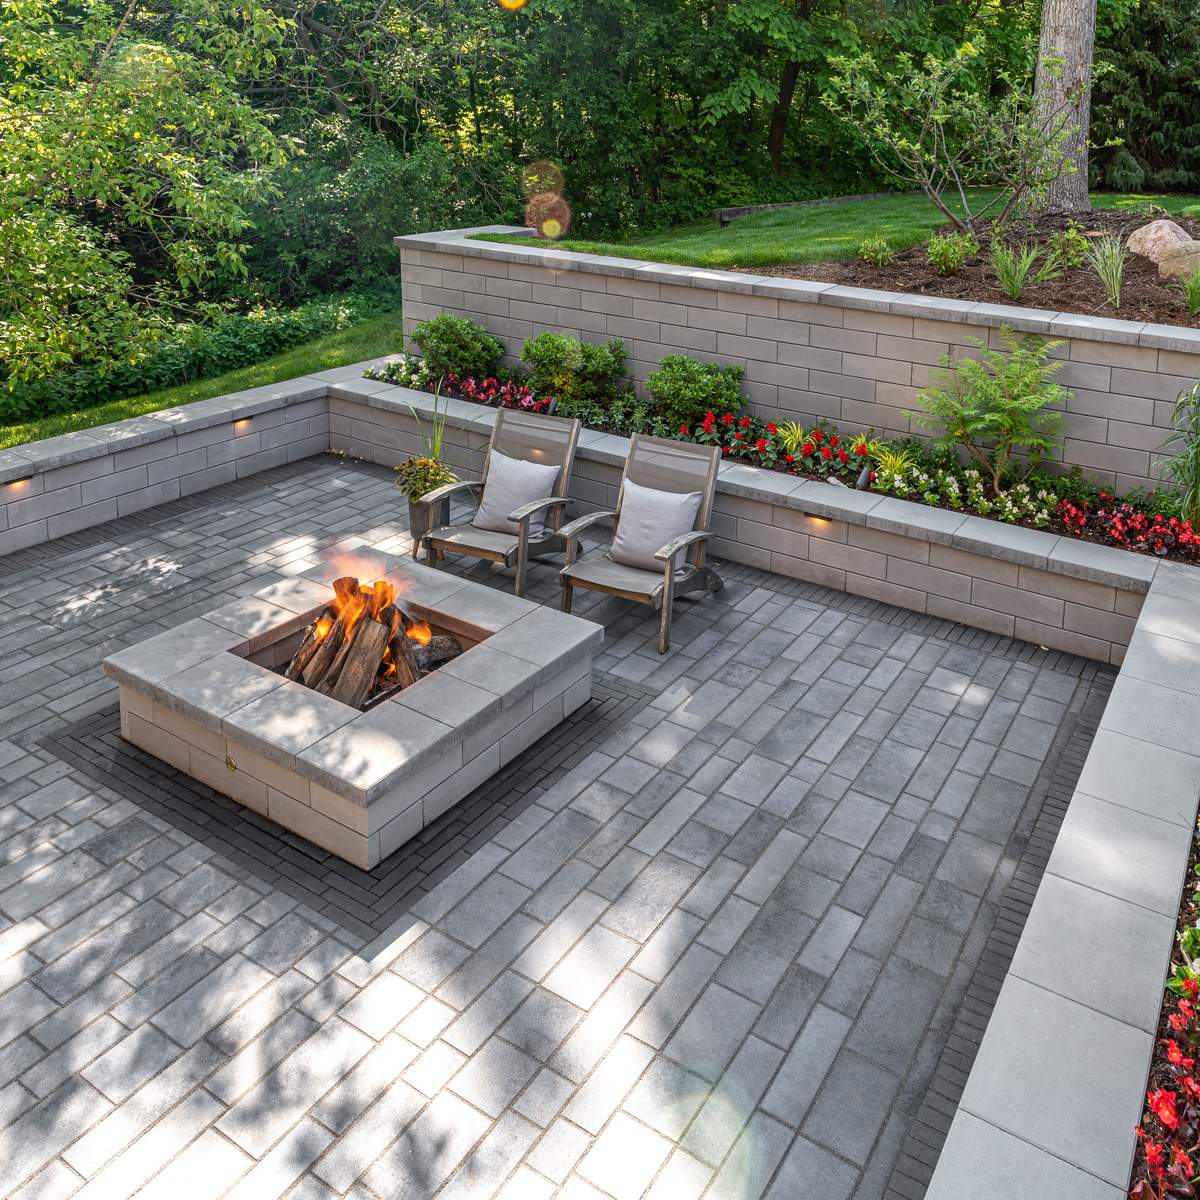 How to Build a Fire Pit Using Fire Bricks - Comprehensive Guide